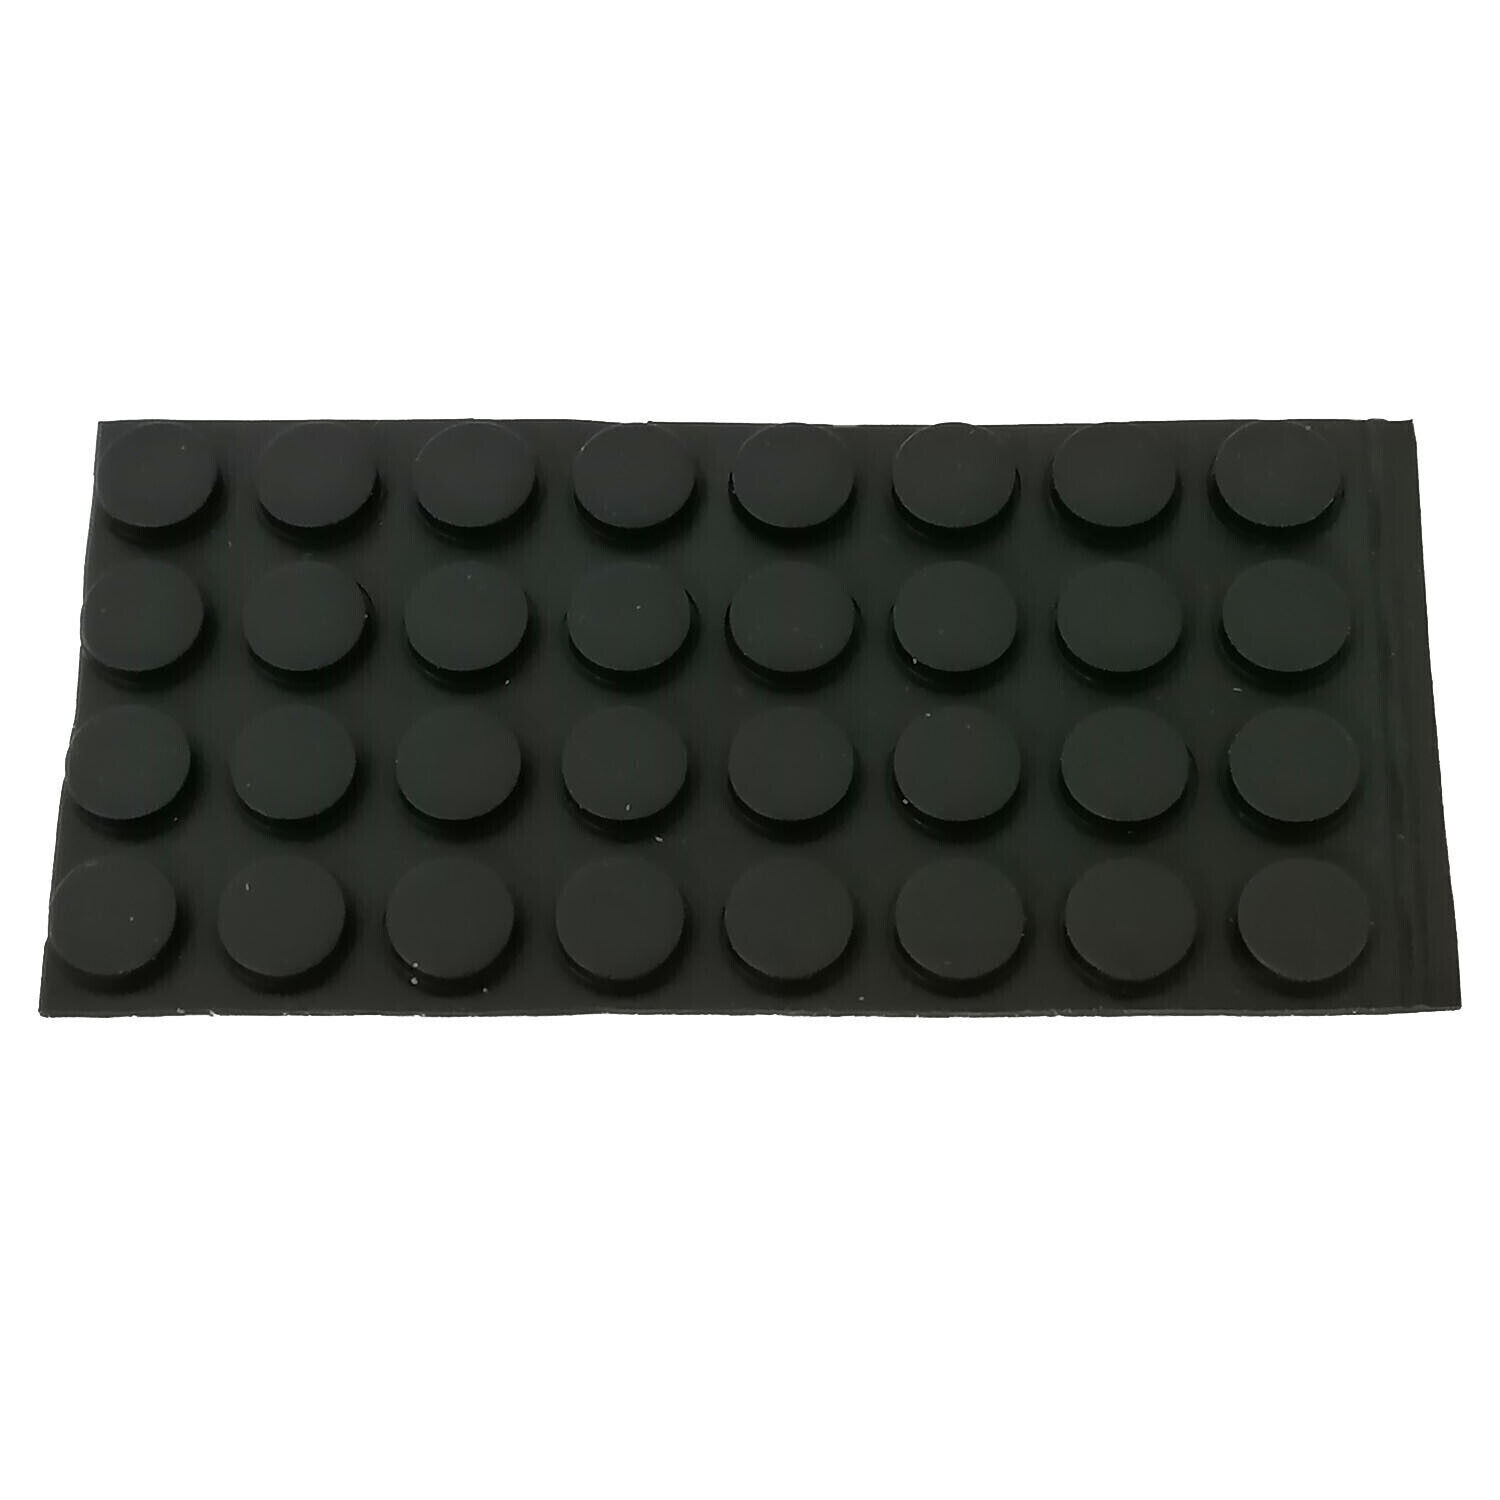 10mm Round Small Rubber Feet 3M Adhesive Backing 3mm Tall 32 Per Package